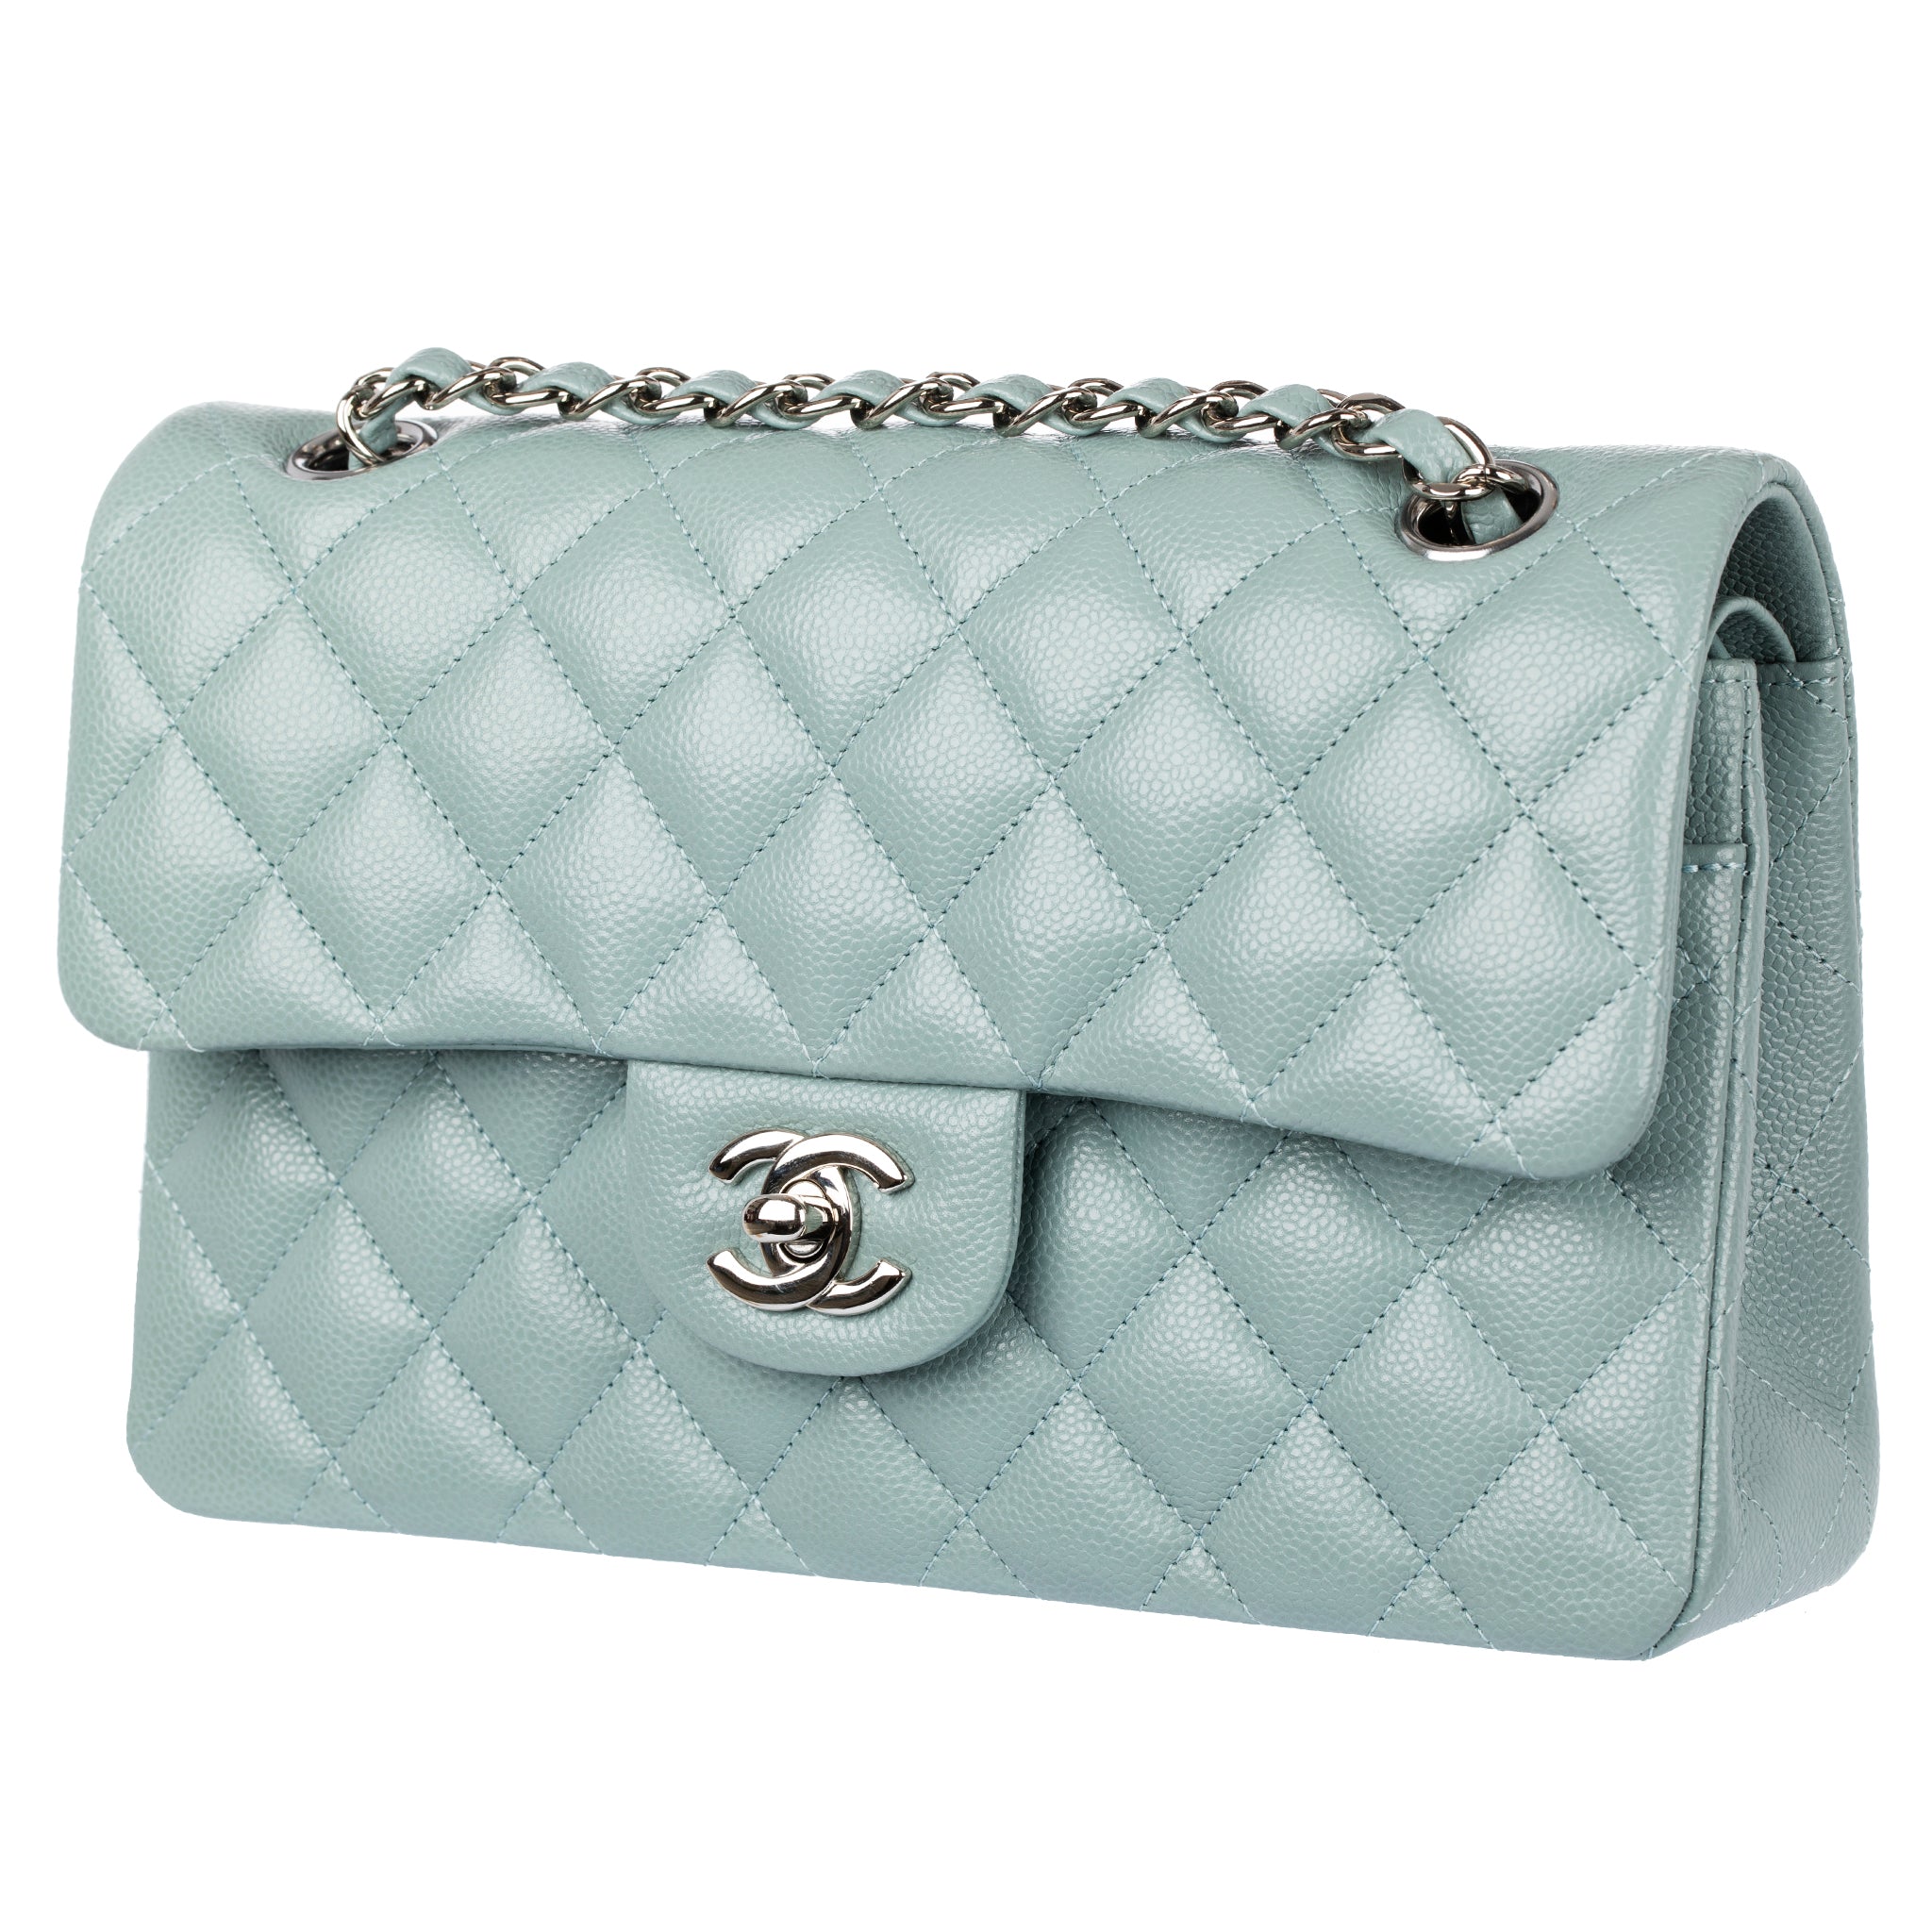 Chanel Small Double Classic Flap Bag Dusty Blue Caviar Leather Silver Tone Hardware